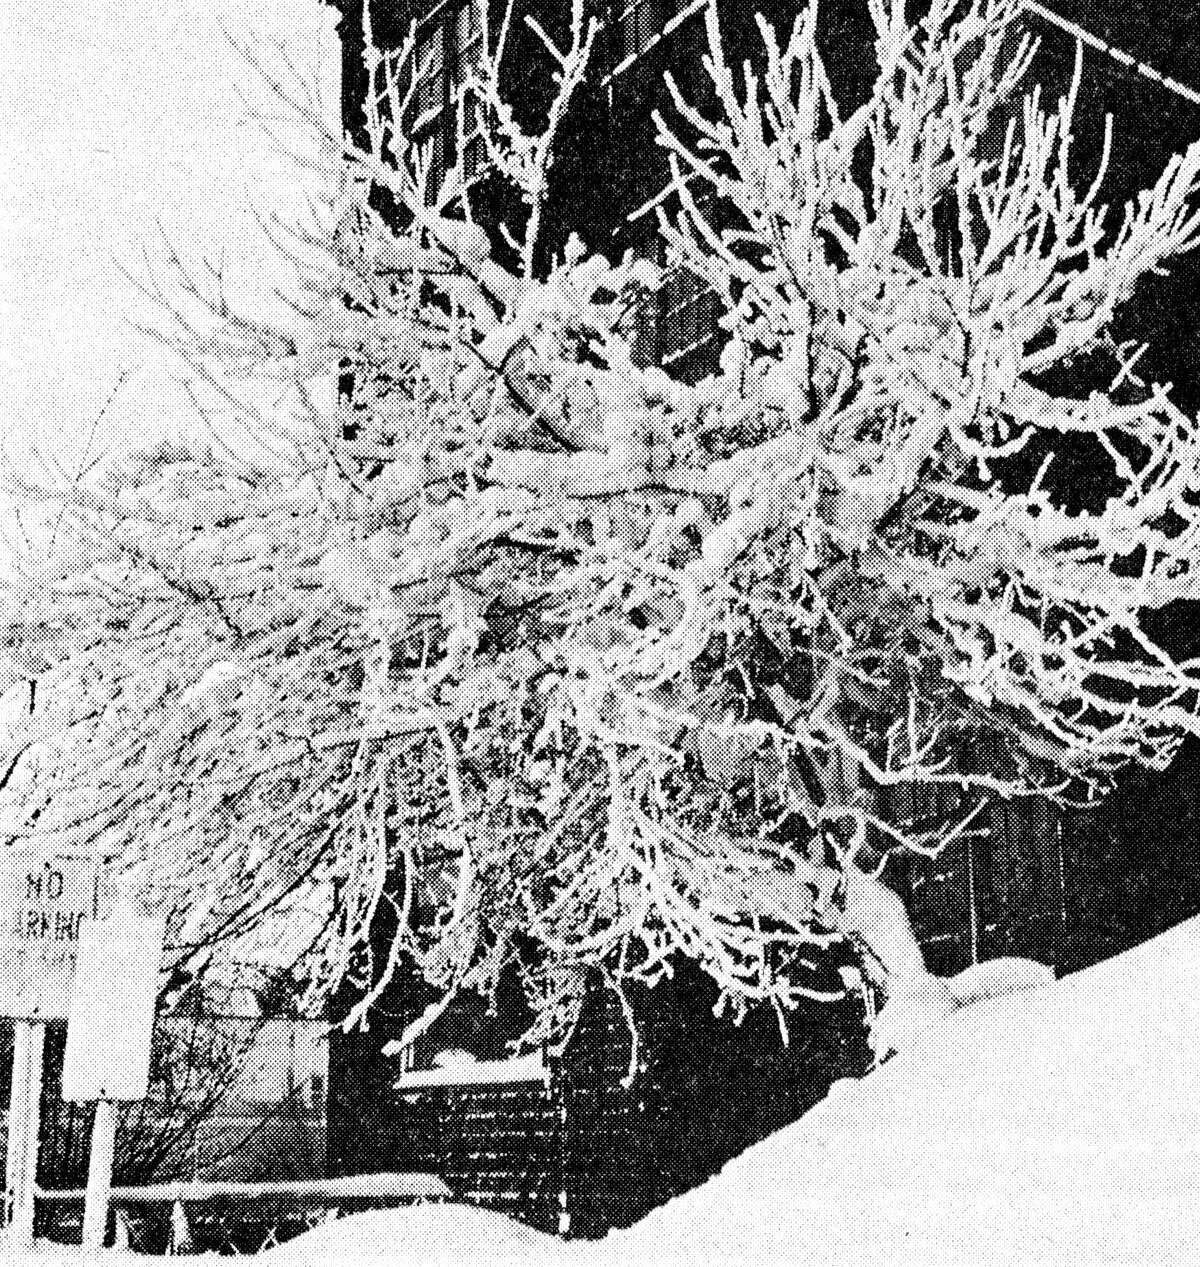 Winter's fury and beauty seem to go hand-in-hand, with the resulting beauty to be seen everywhere. One such example is the tree located near the north end of the Maple Street Bridge. The photo was published in the News Advocate on Jan. 25, 1963.